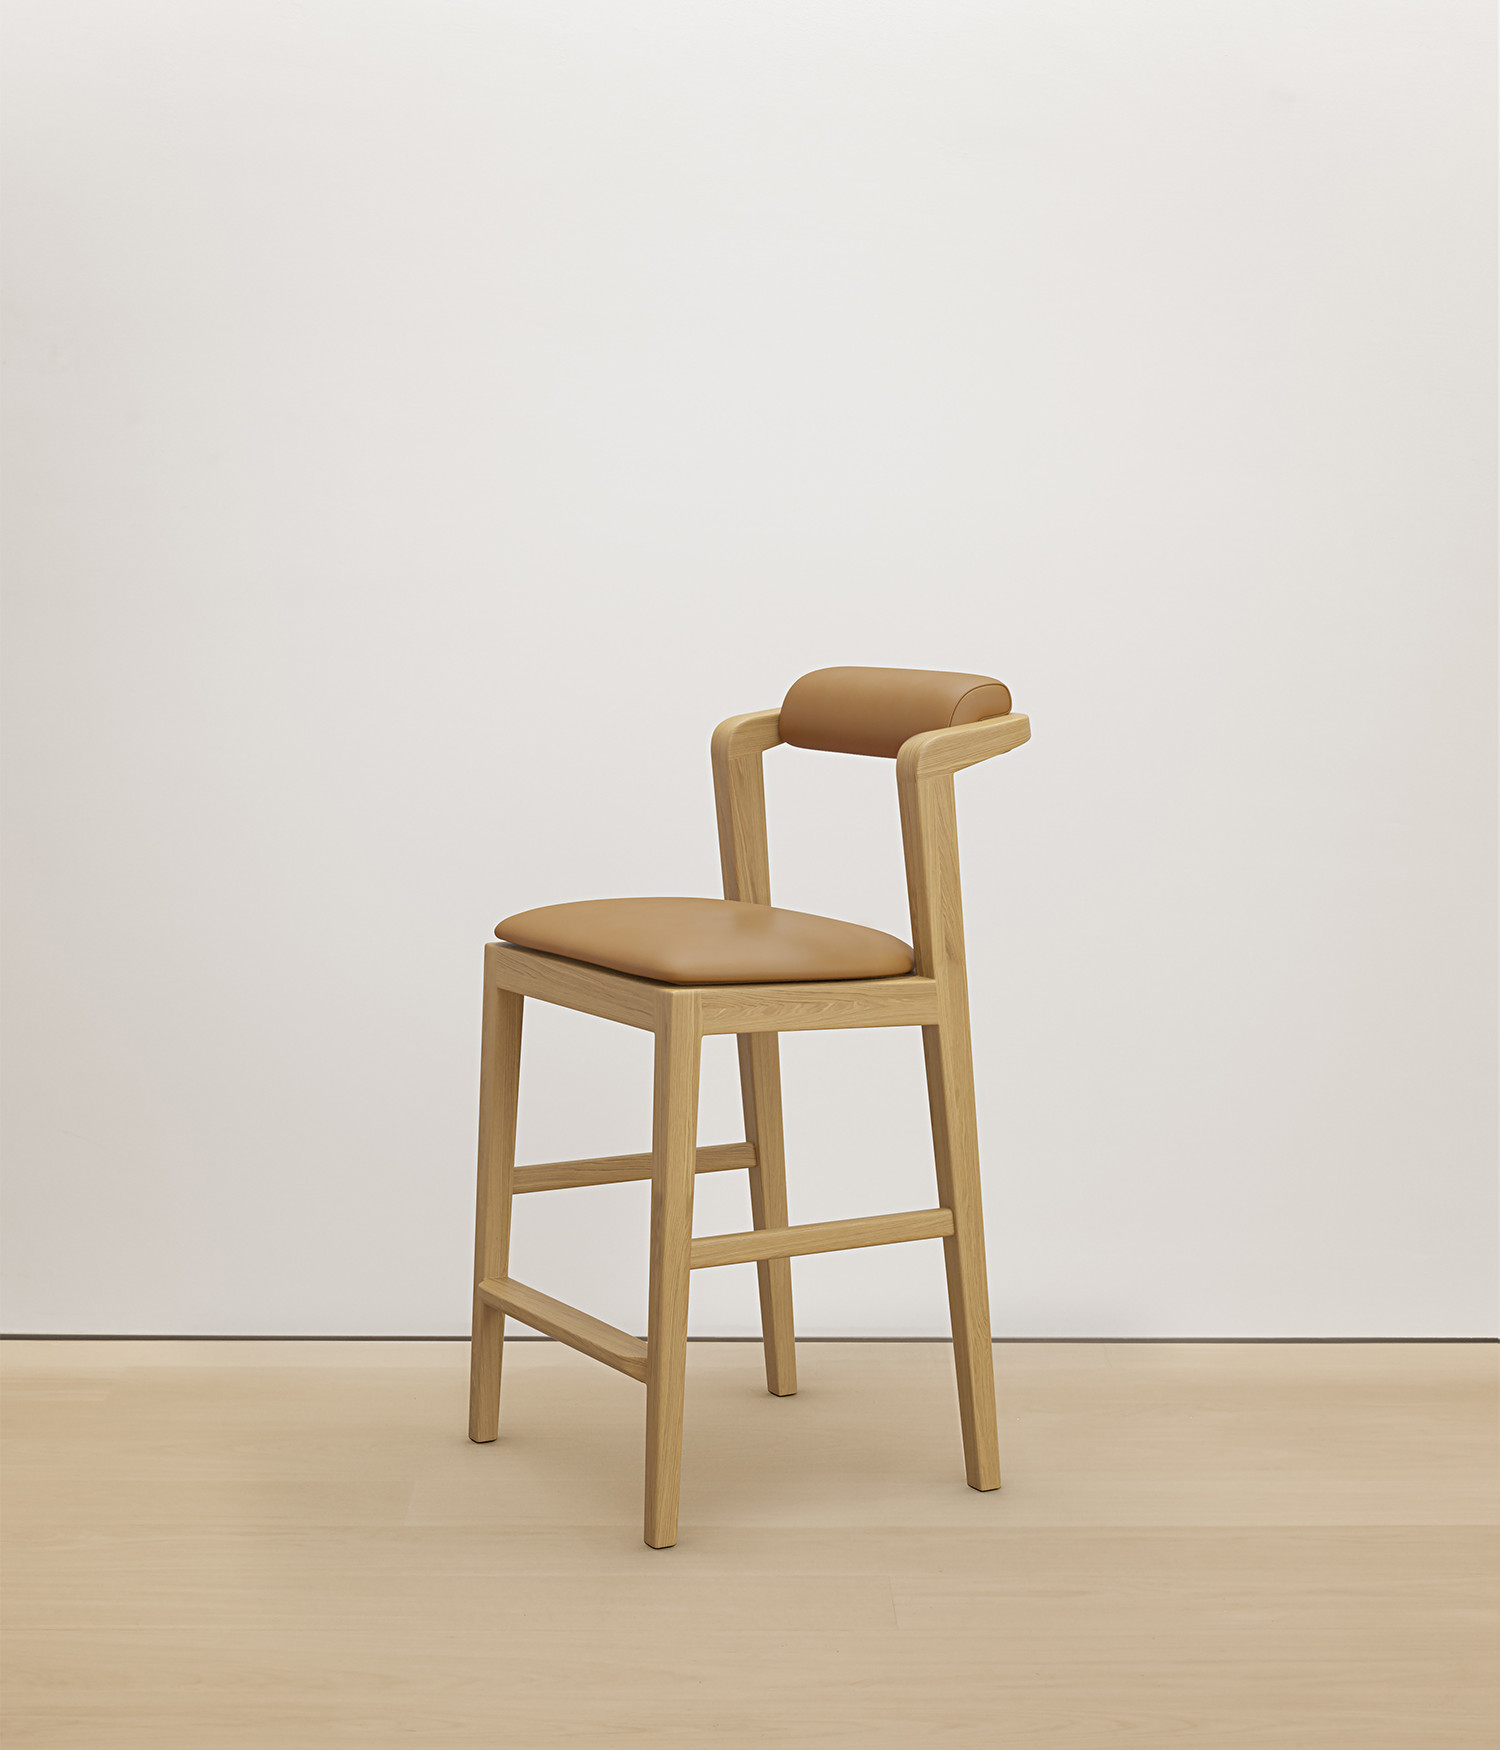  white-oak stool with tan color upholstered seat